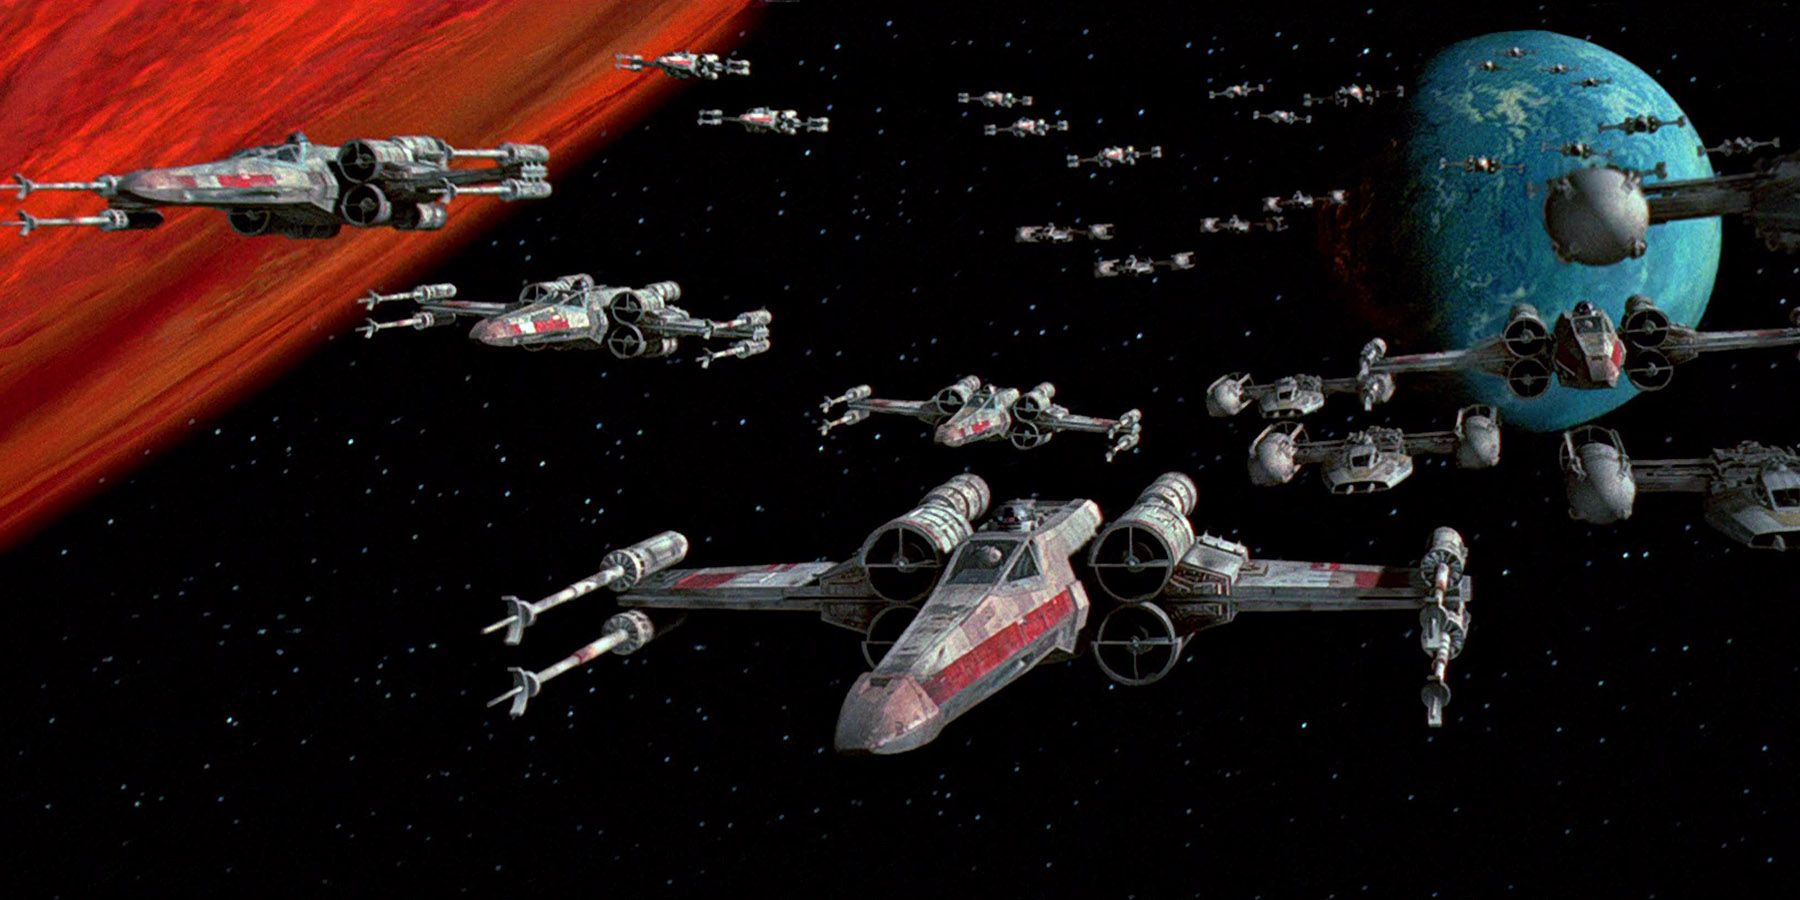 X-Wings head for the Death Star in Star Wars.